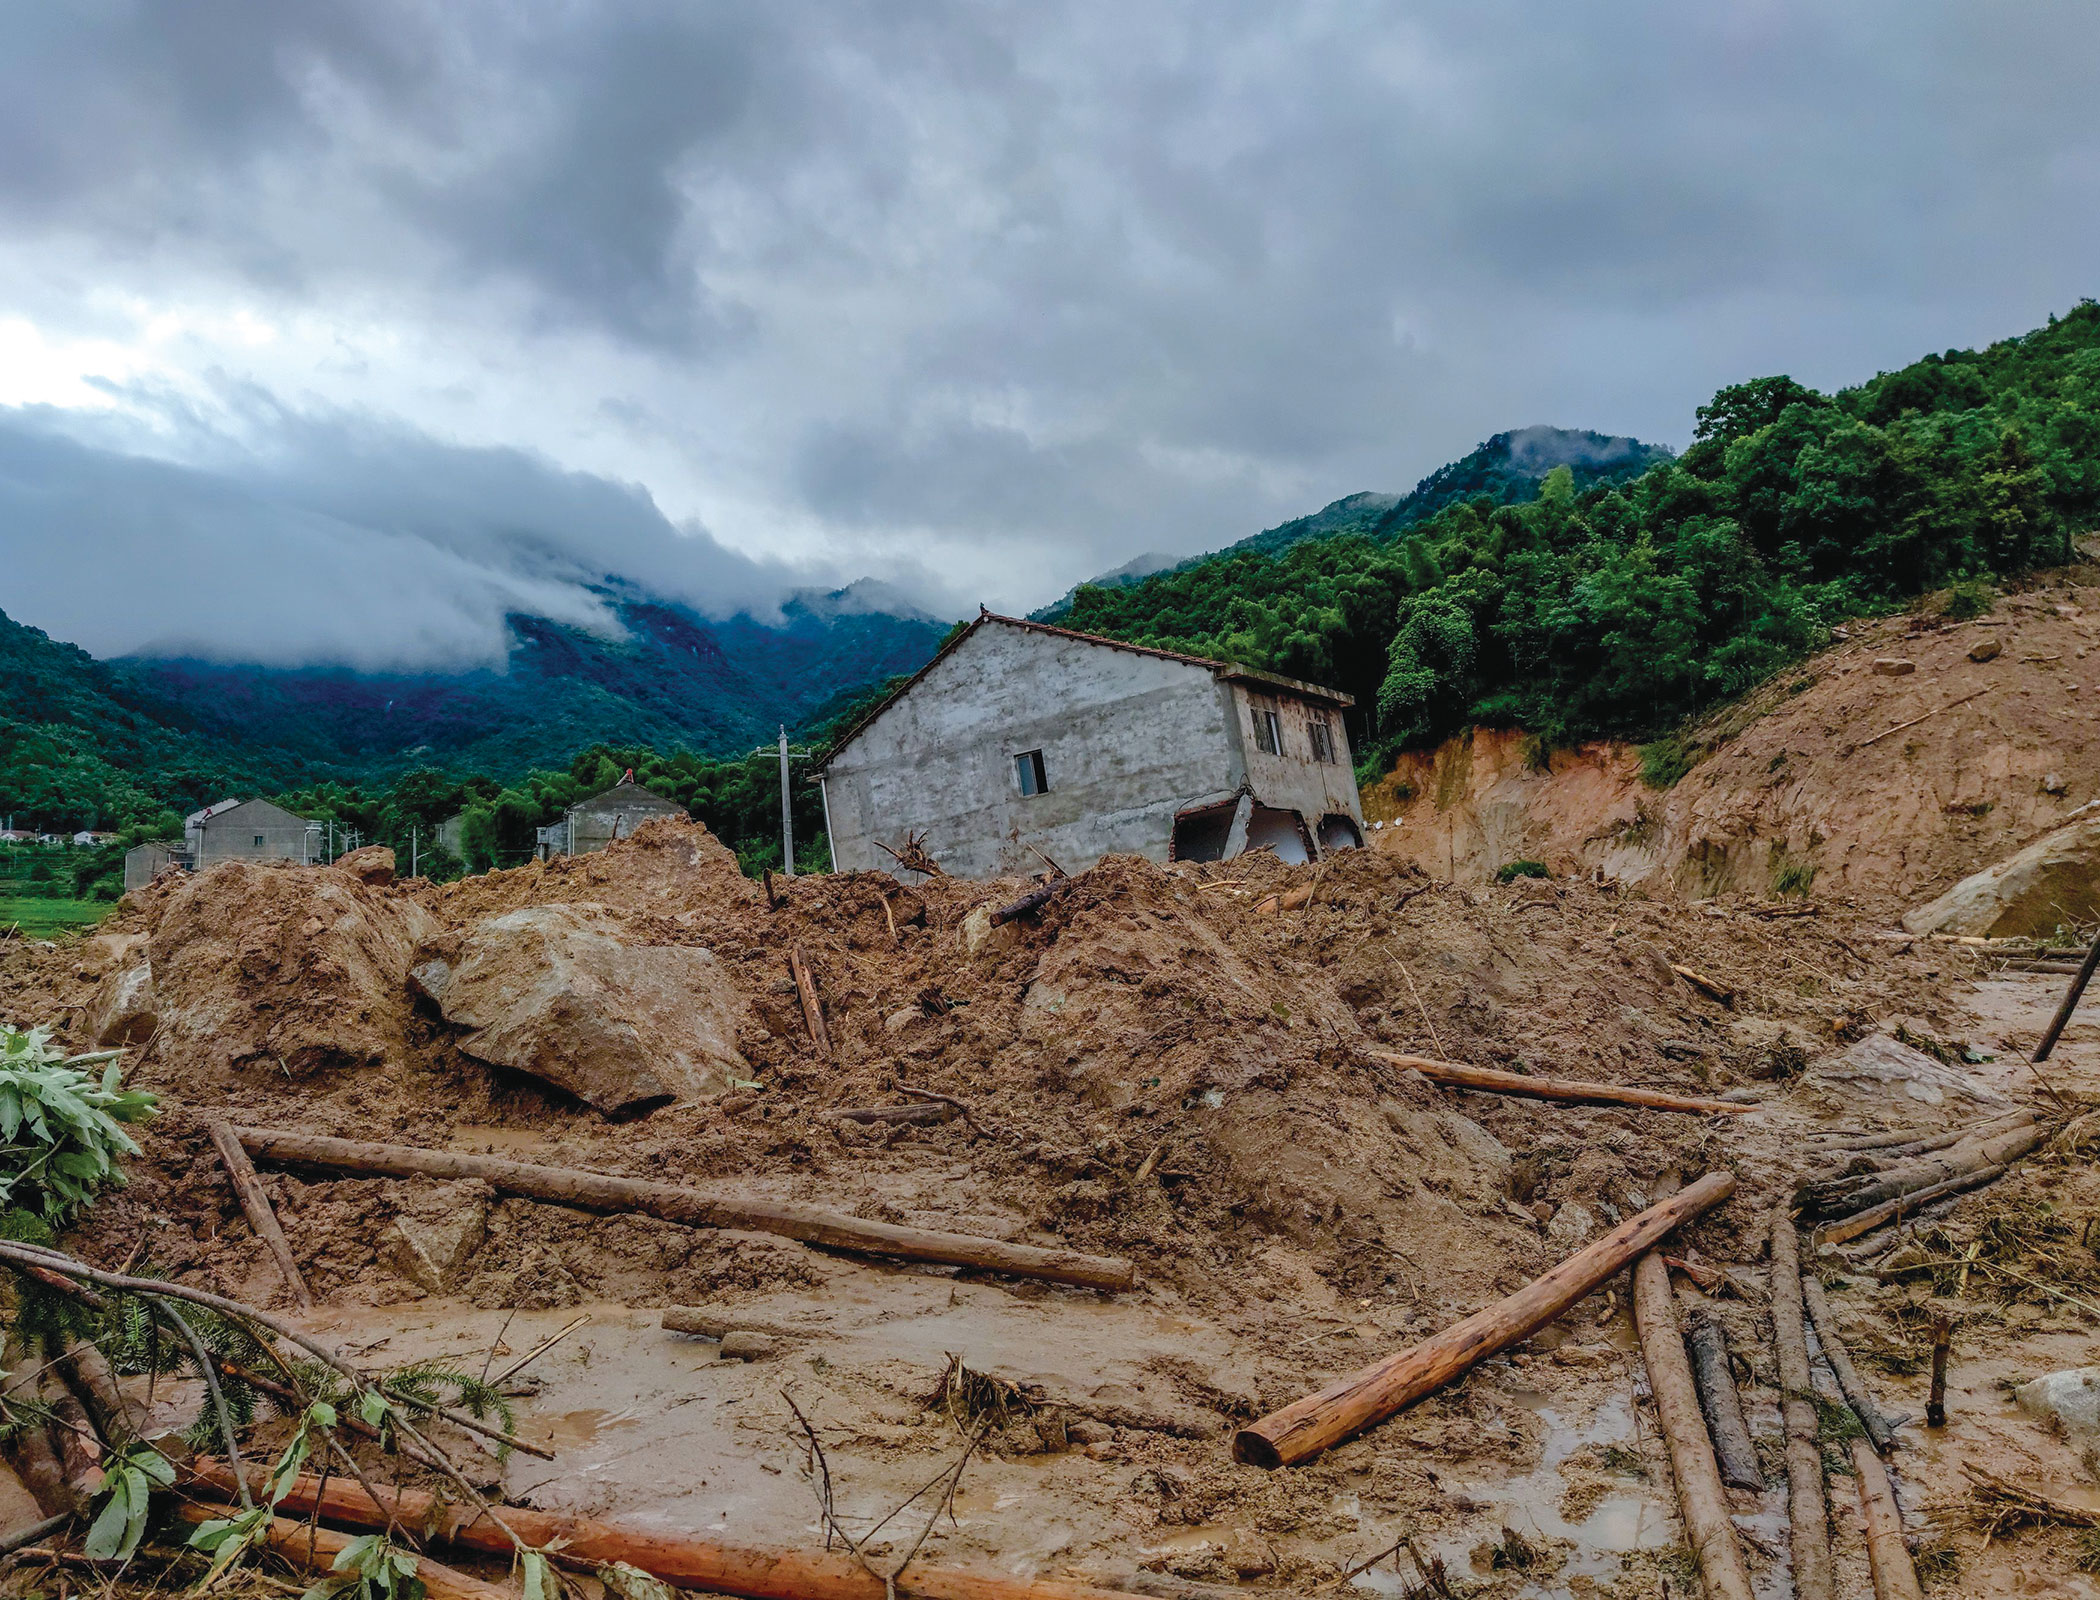 Climate change and landslides: the slippery slope towards disaster?